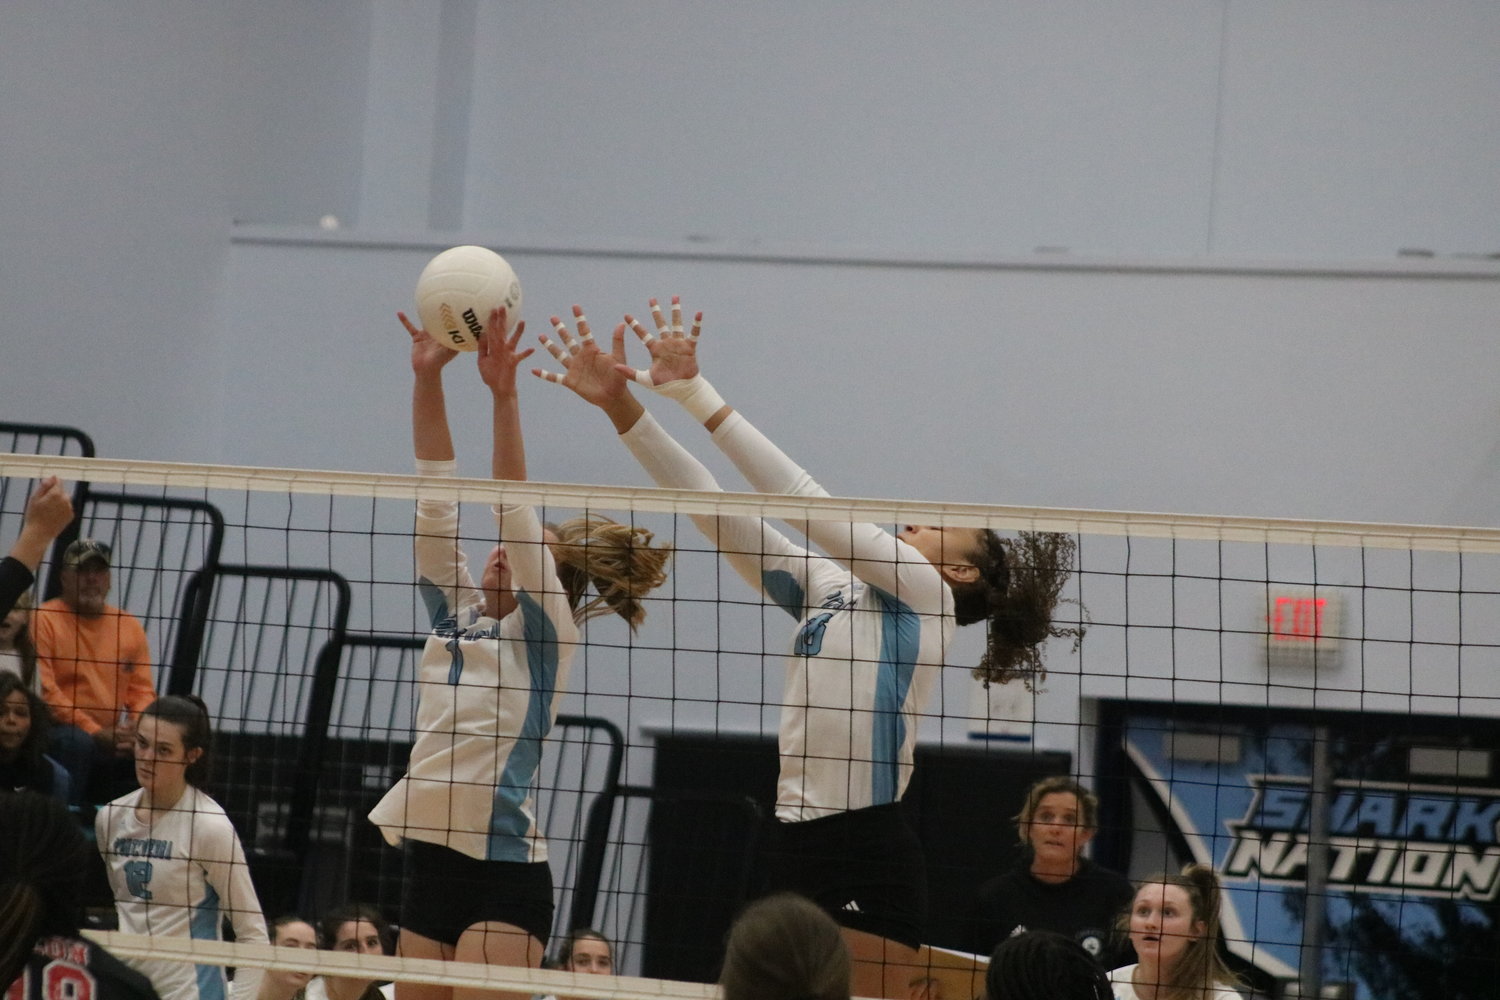 Ava Grall (No. 1) deflects a shot at the net with help from Zeta Washington.